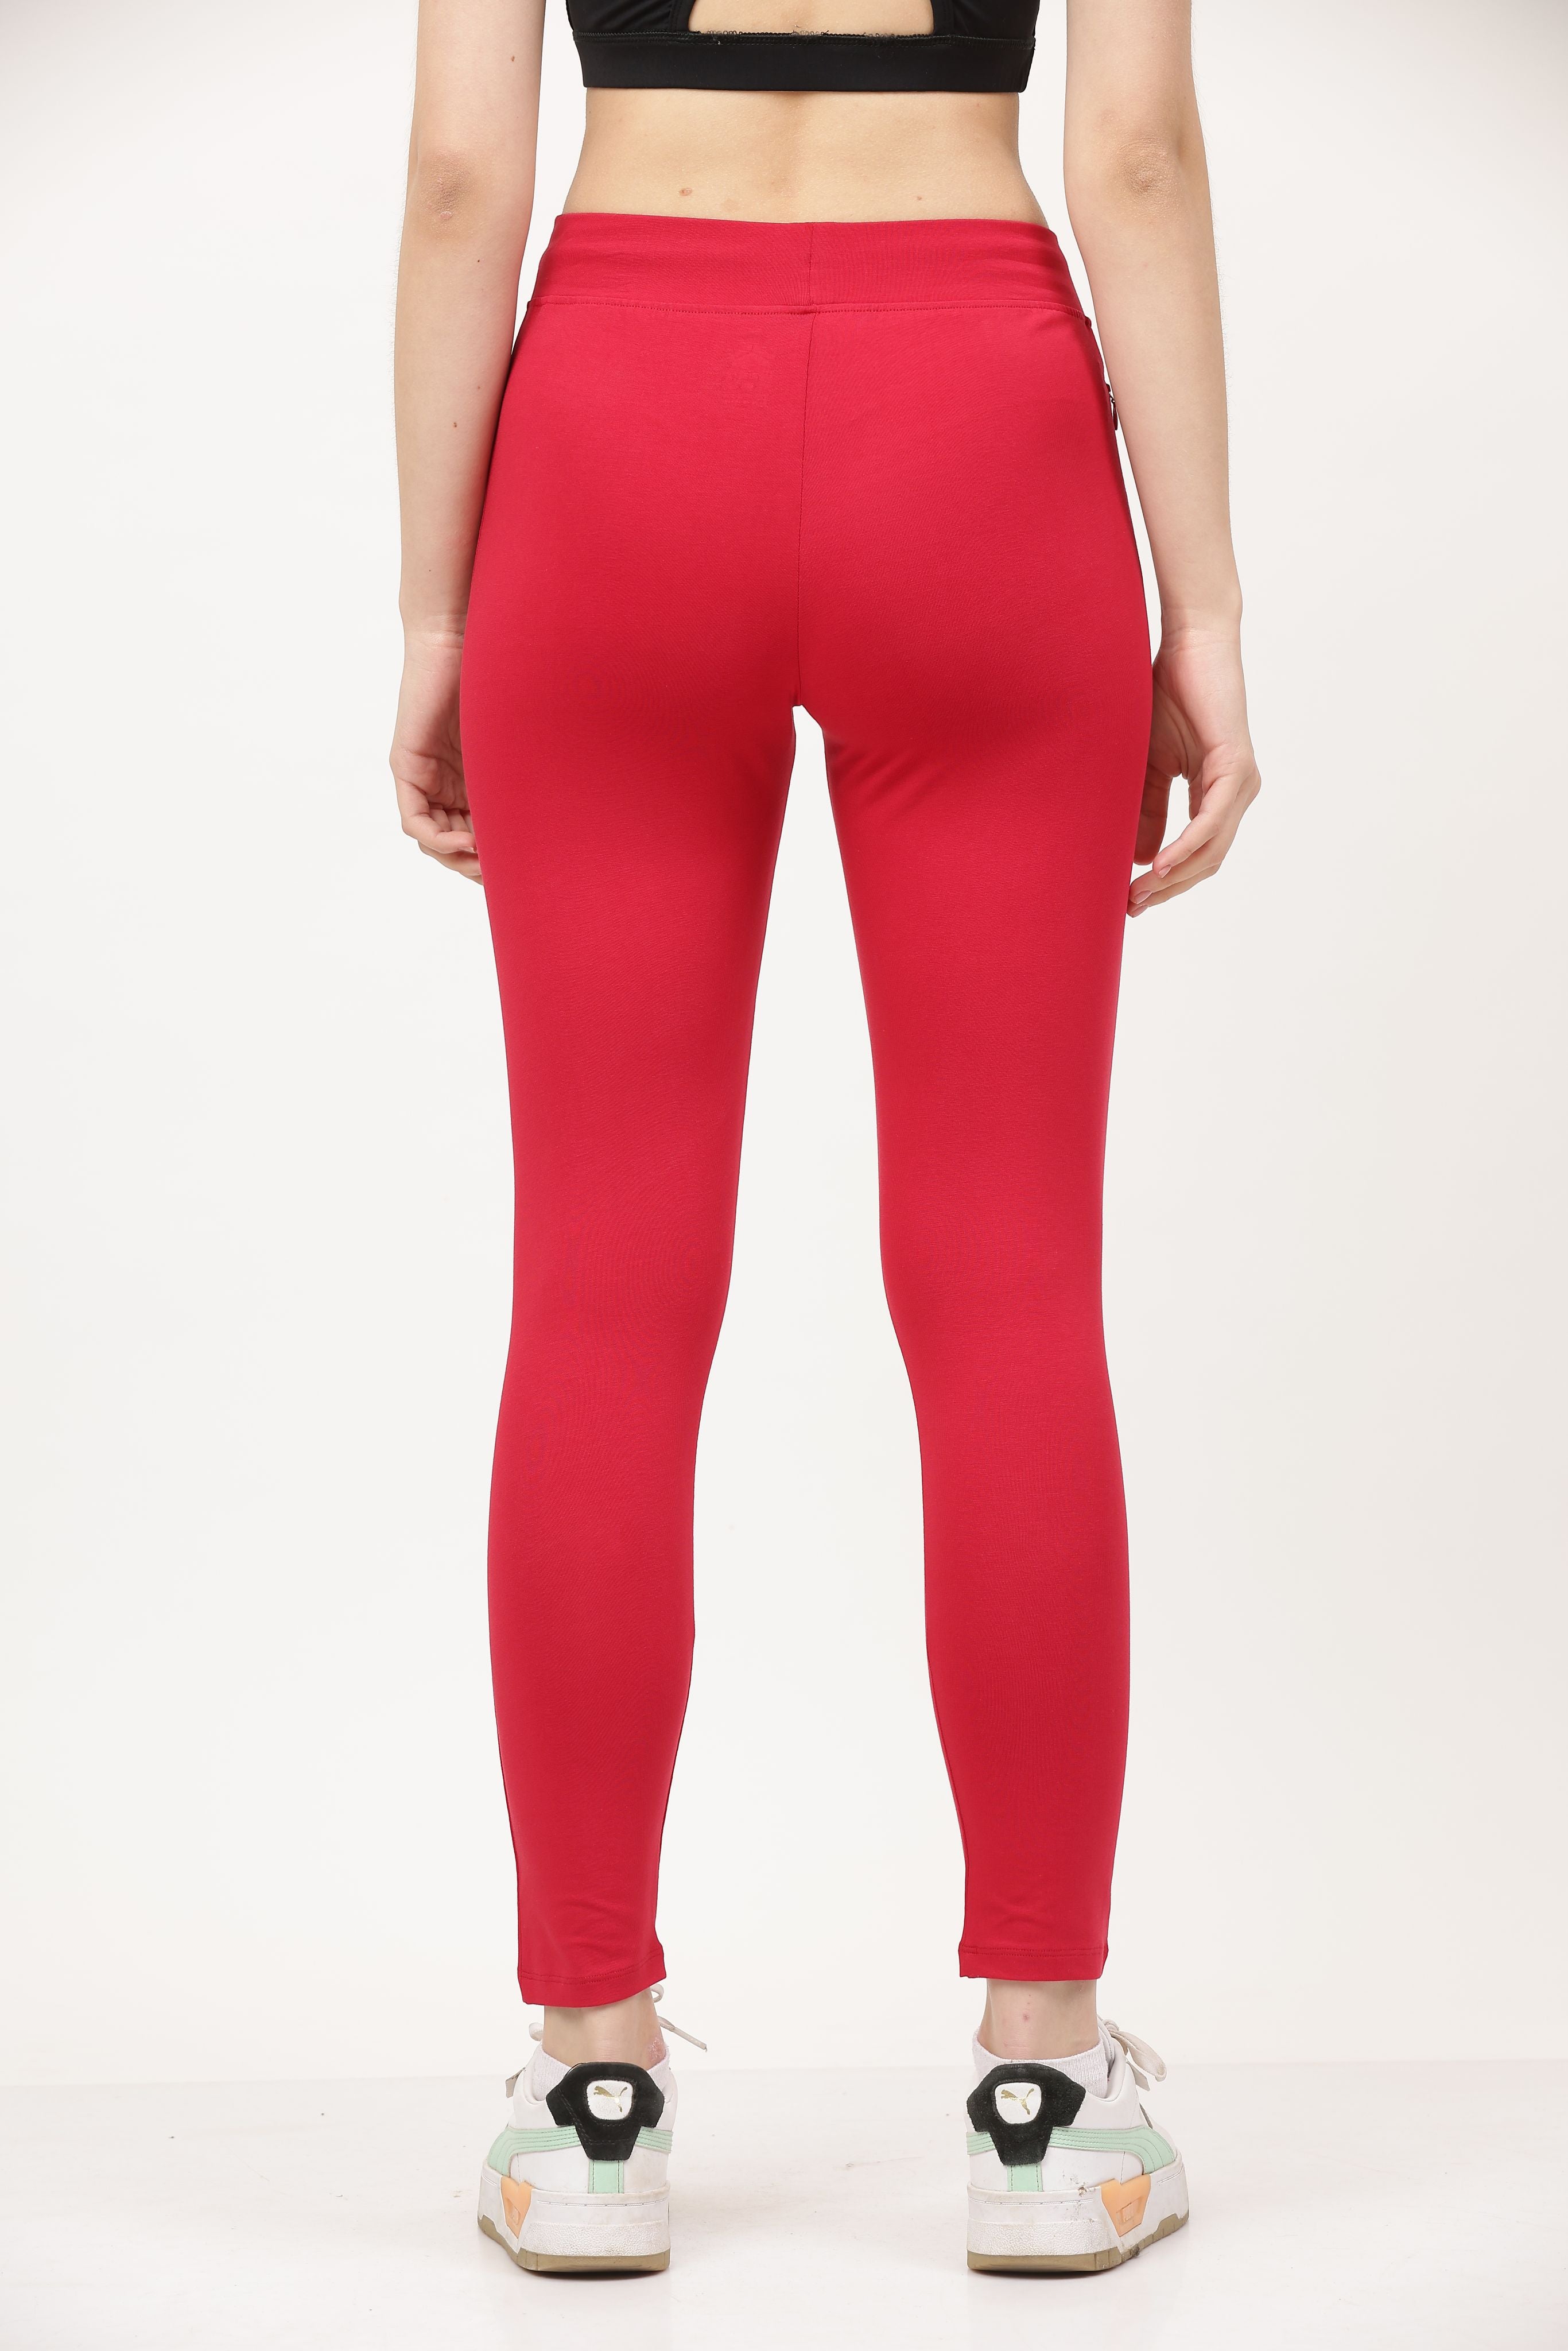 wholesale cotton yoga pants for online  resellers